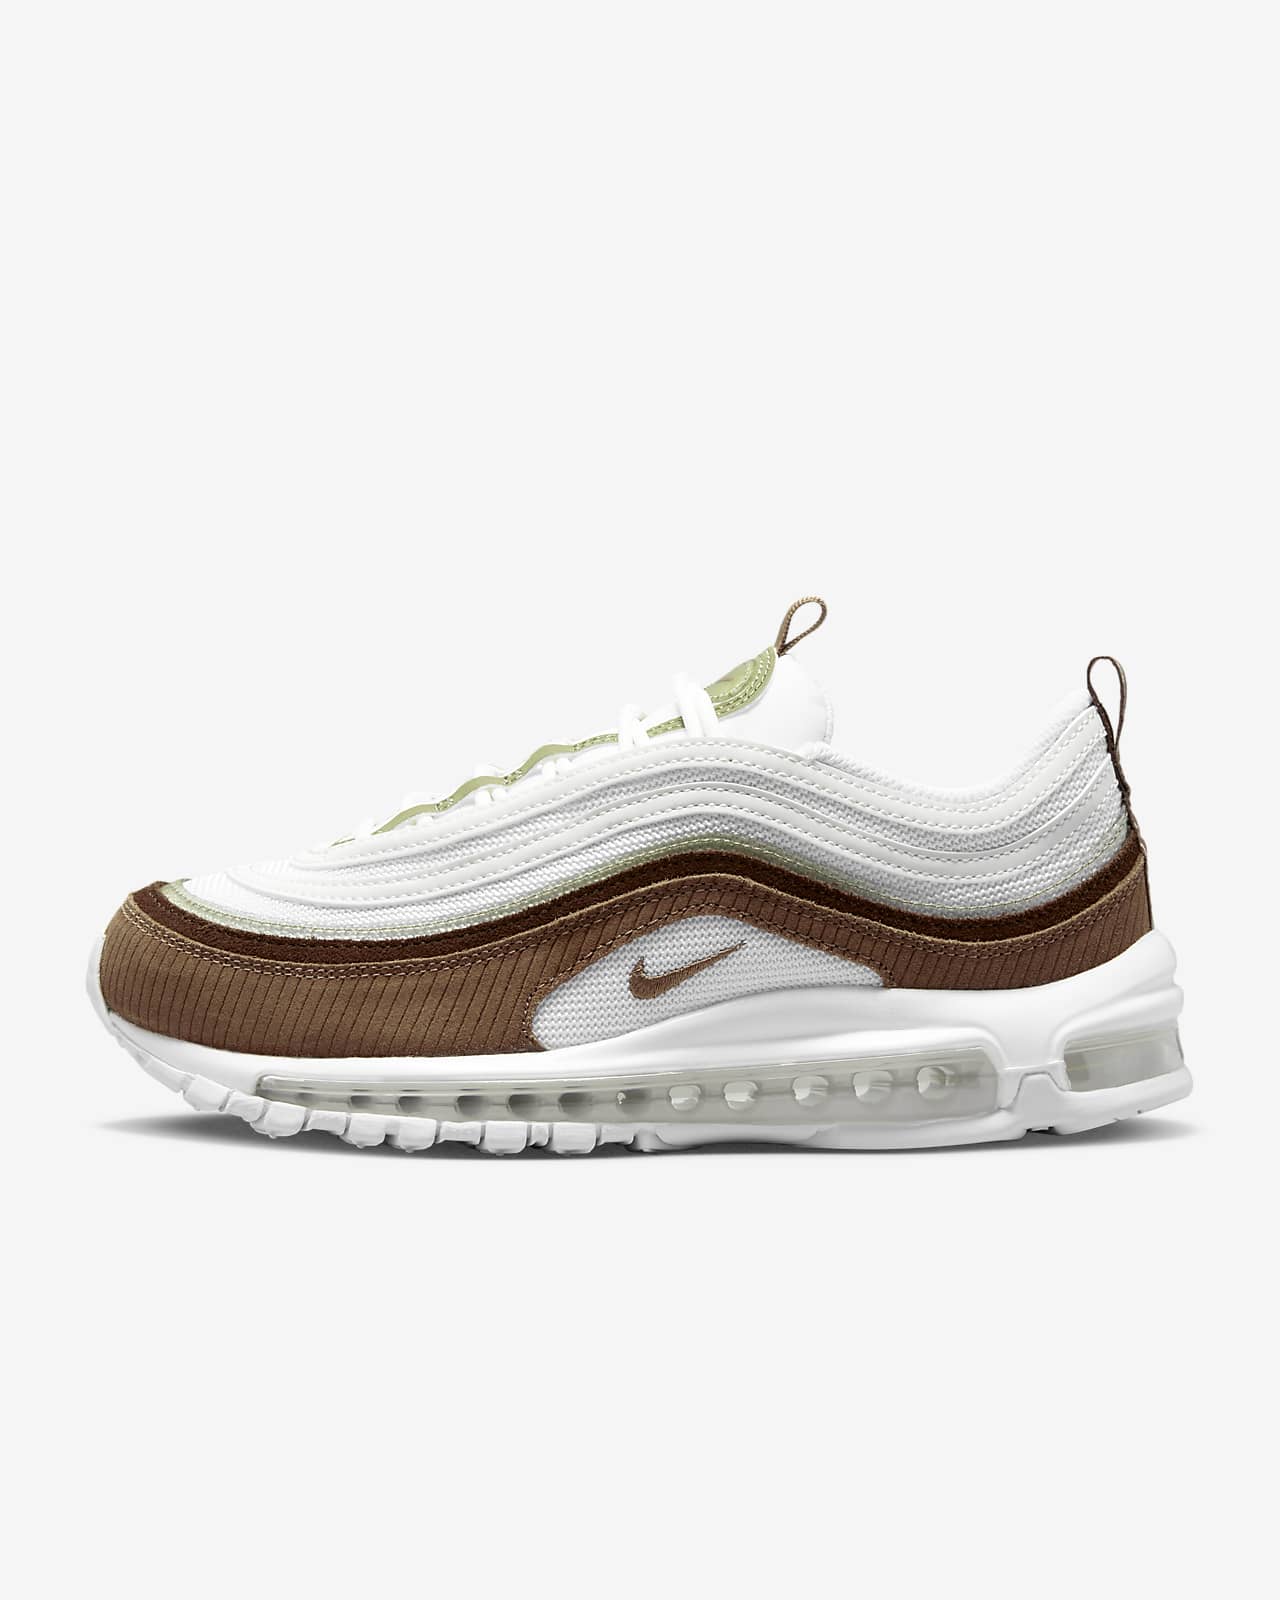 size 8 women's nike air max 97 shoes